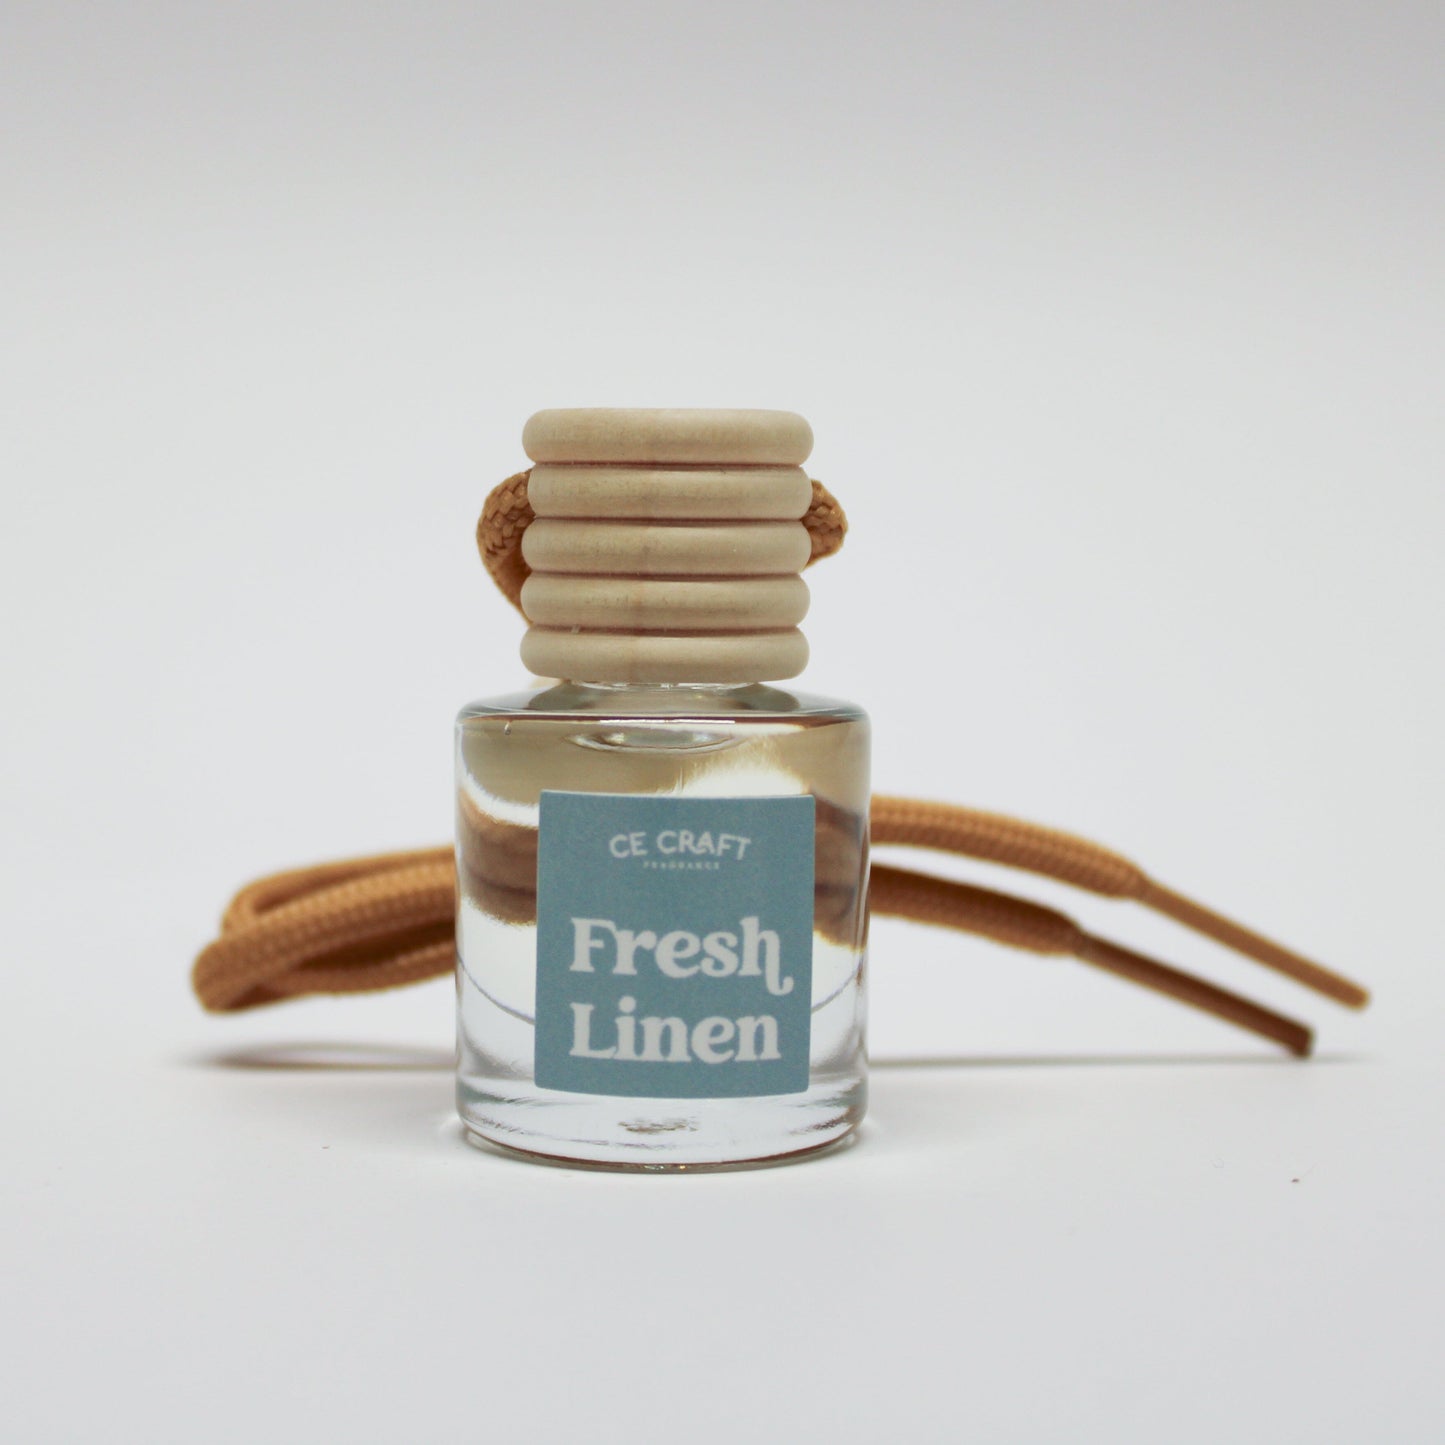 Scented Car Freshener - Car Air Diffuser - Long Lasting Fragrance for Car Vehicle Air Fresheners CE Craft Fresh Linen 